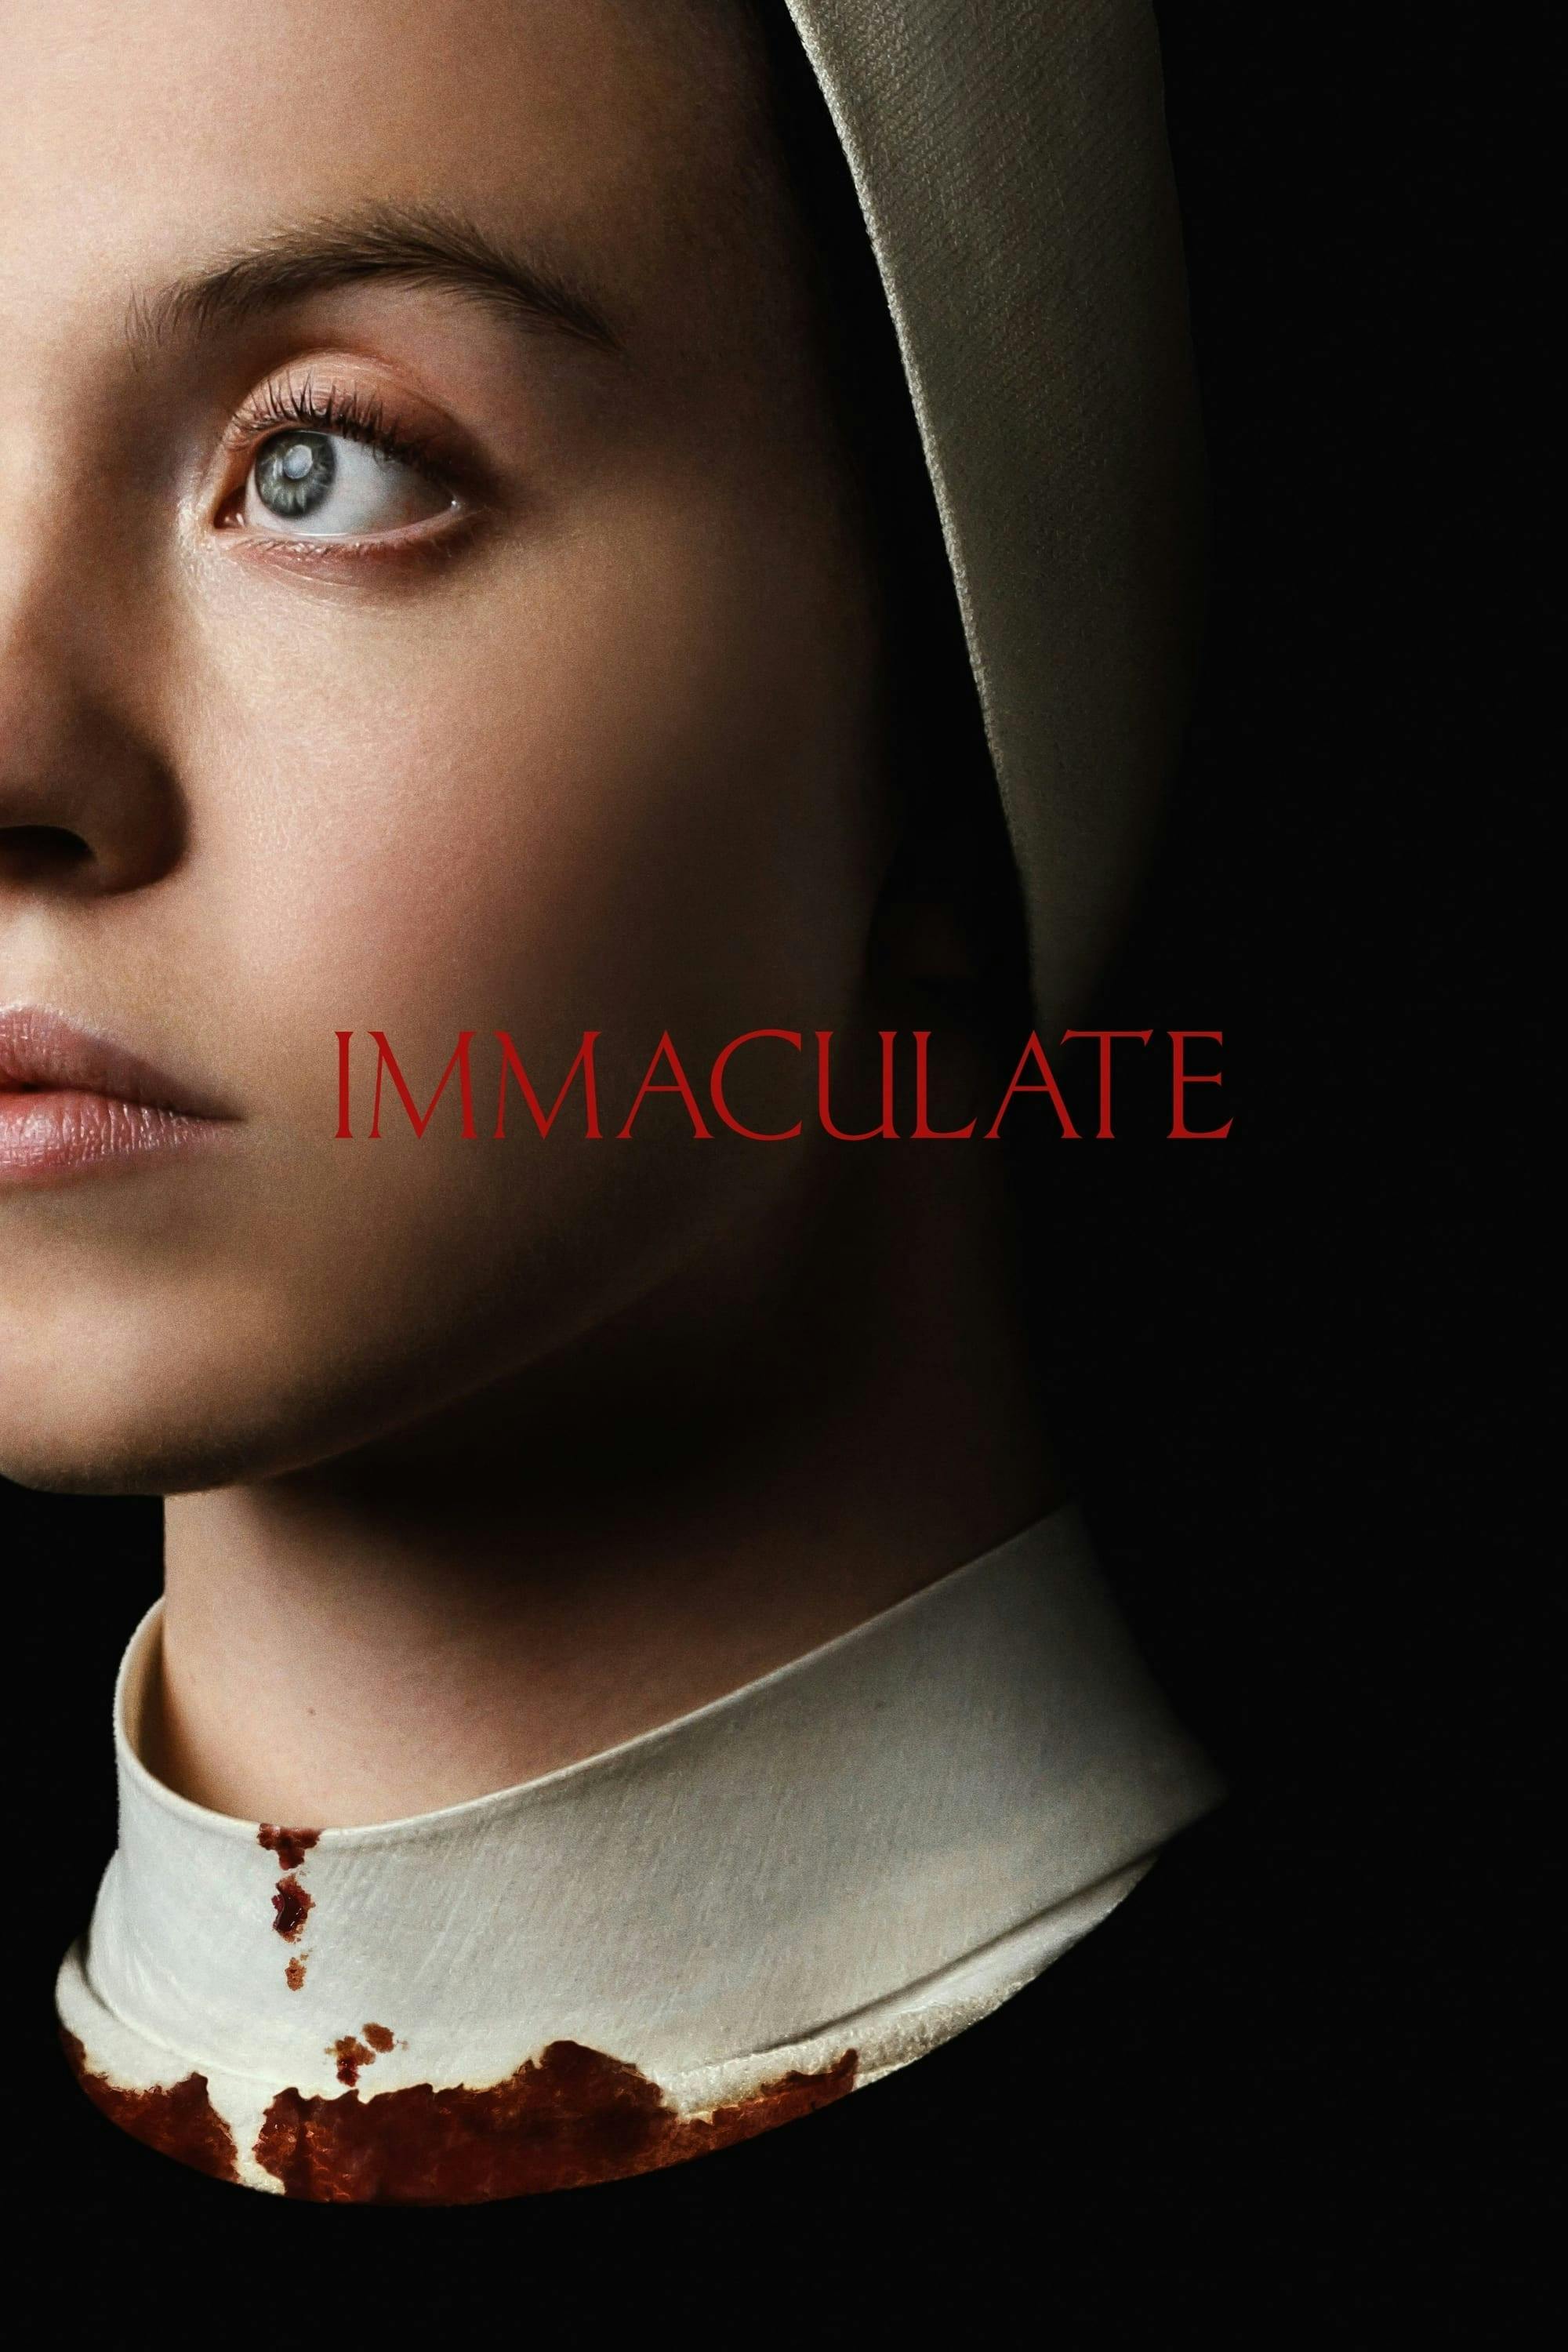 Movie poster of "Immaculate"